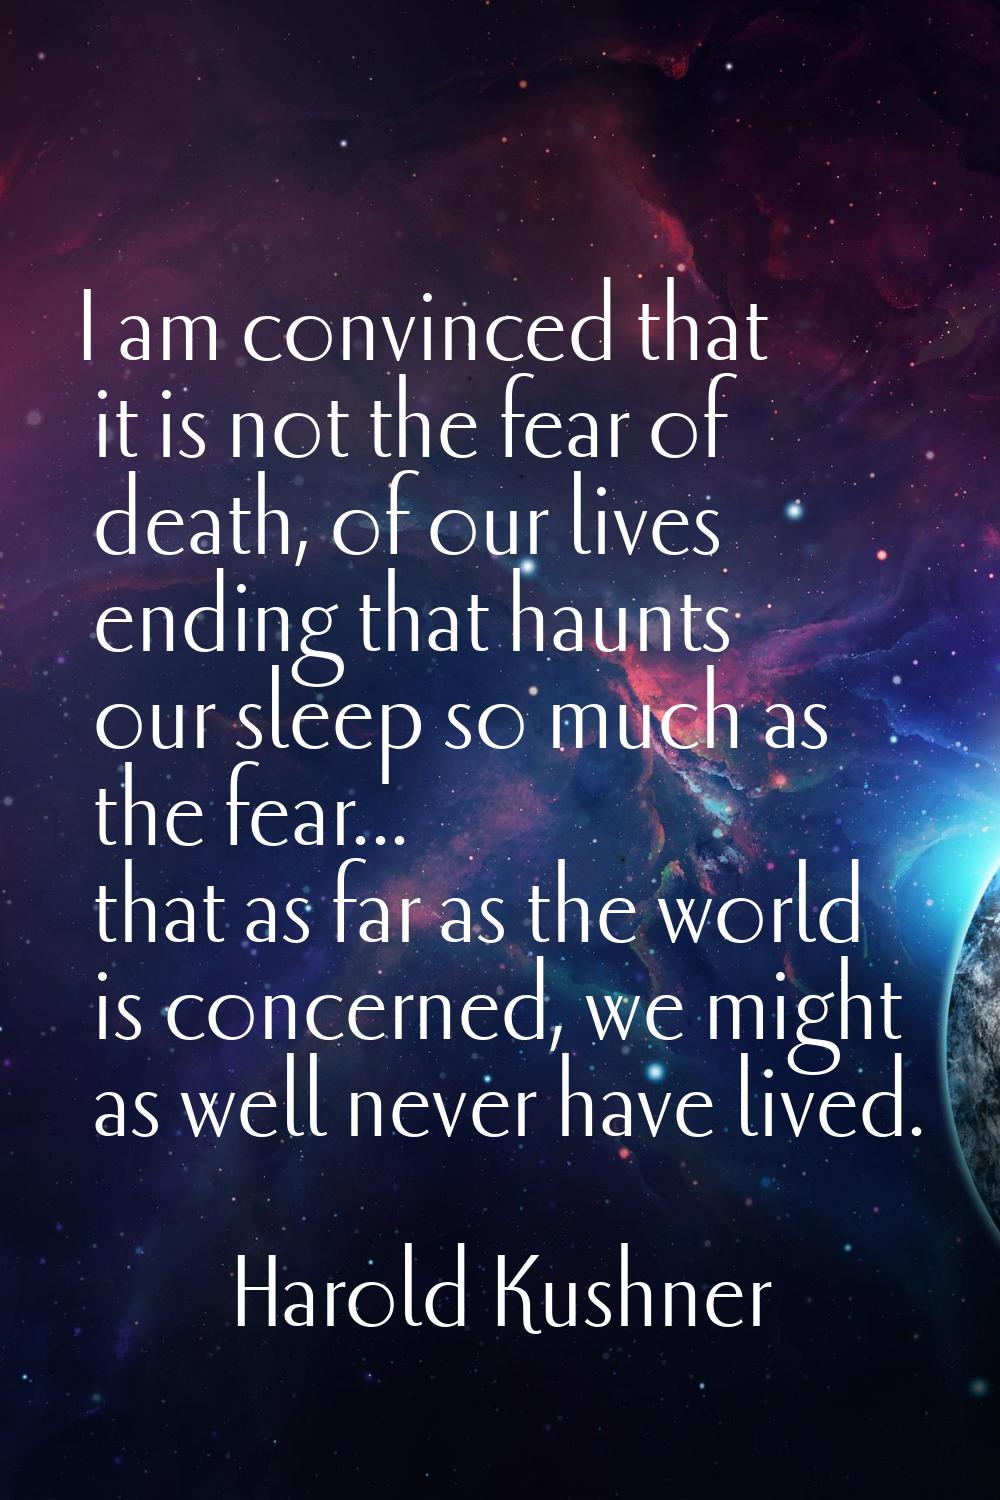 I am convinced that it is not the fear of death, of our lives ending that haunts our sleep so much 